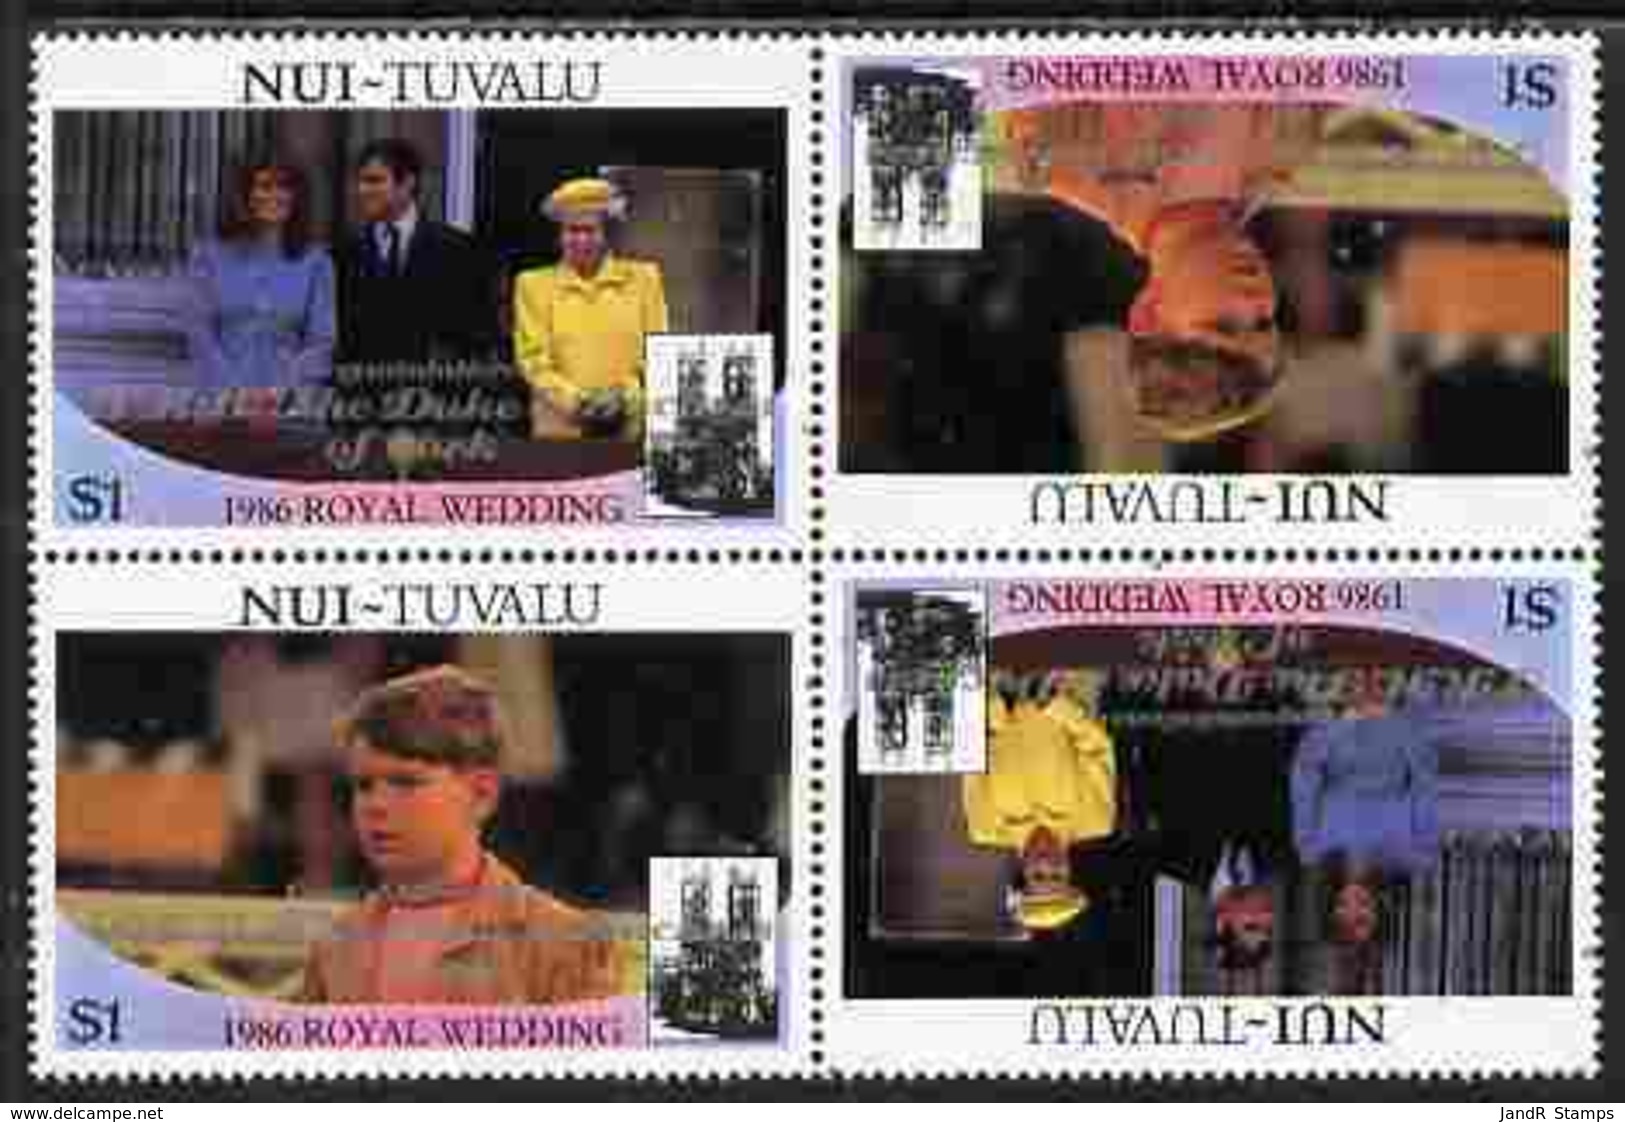 Tuvalu - Nui 1986 Royal Wedding (Andrew & Fergie) $1 With 'Congratulations' Opt In Silver In Unissued Perf Tete-beche Bl - Tuvalu